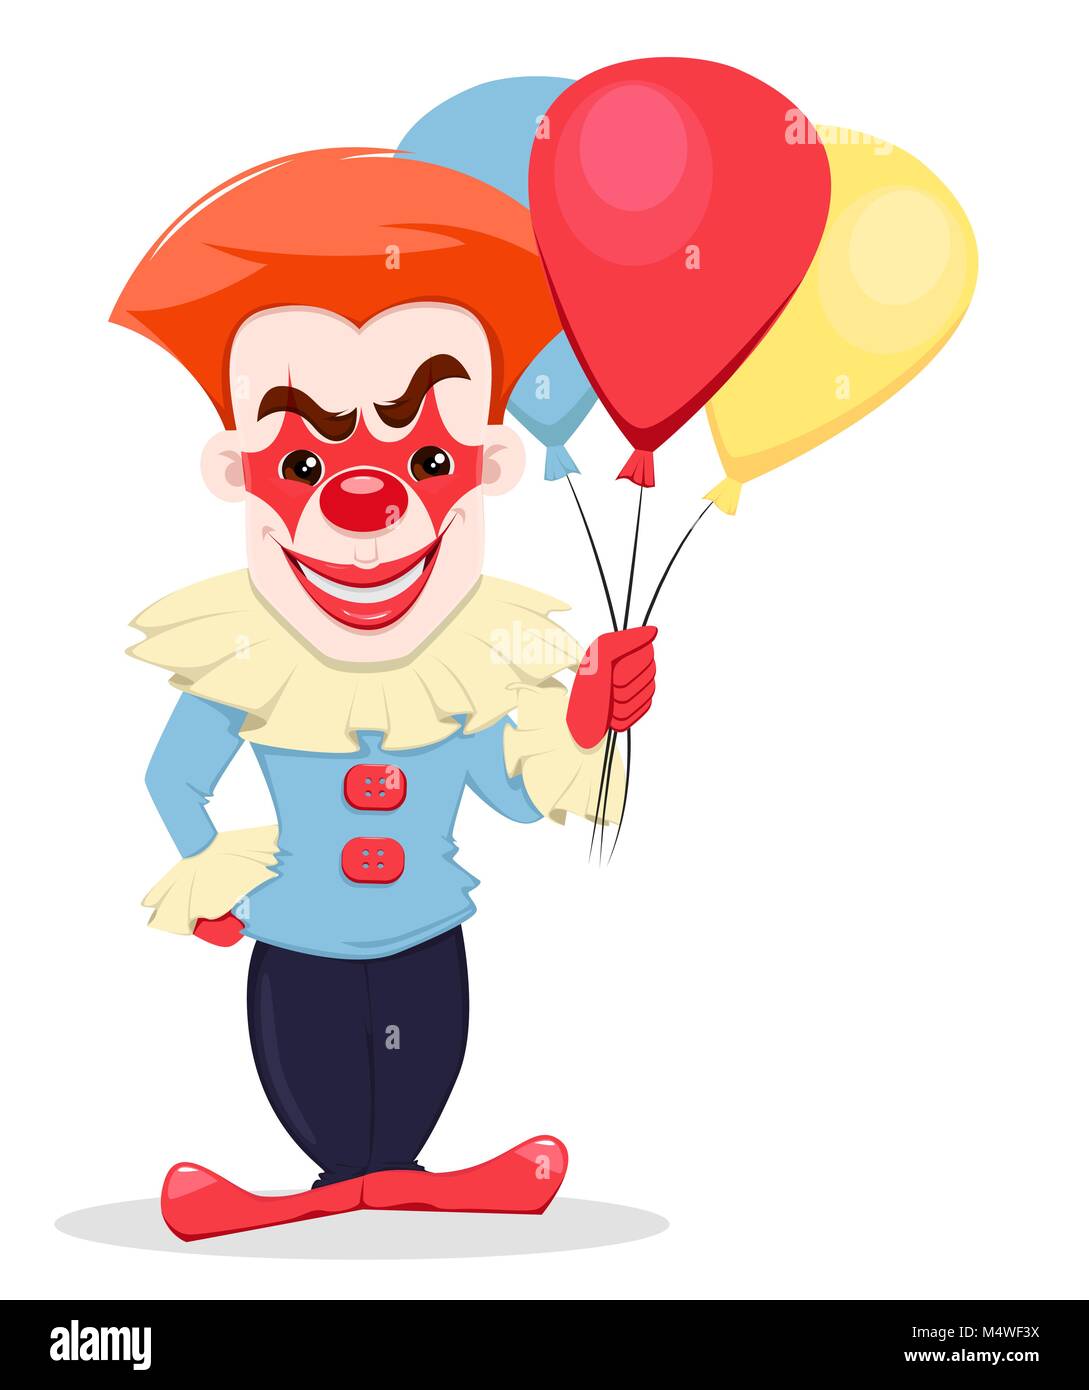 Halloween invitation or greeting card. Smiling evil clown with air balloons. Vector illustration on white background Stock Vector